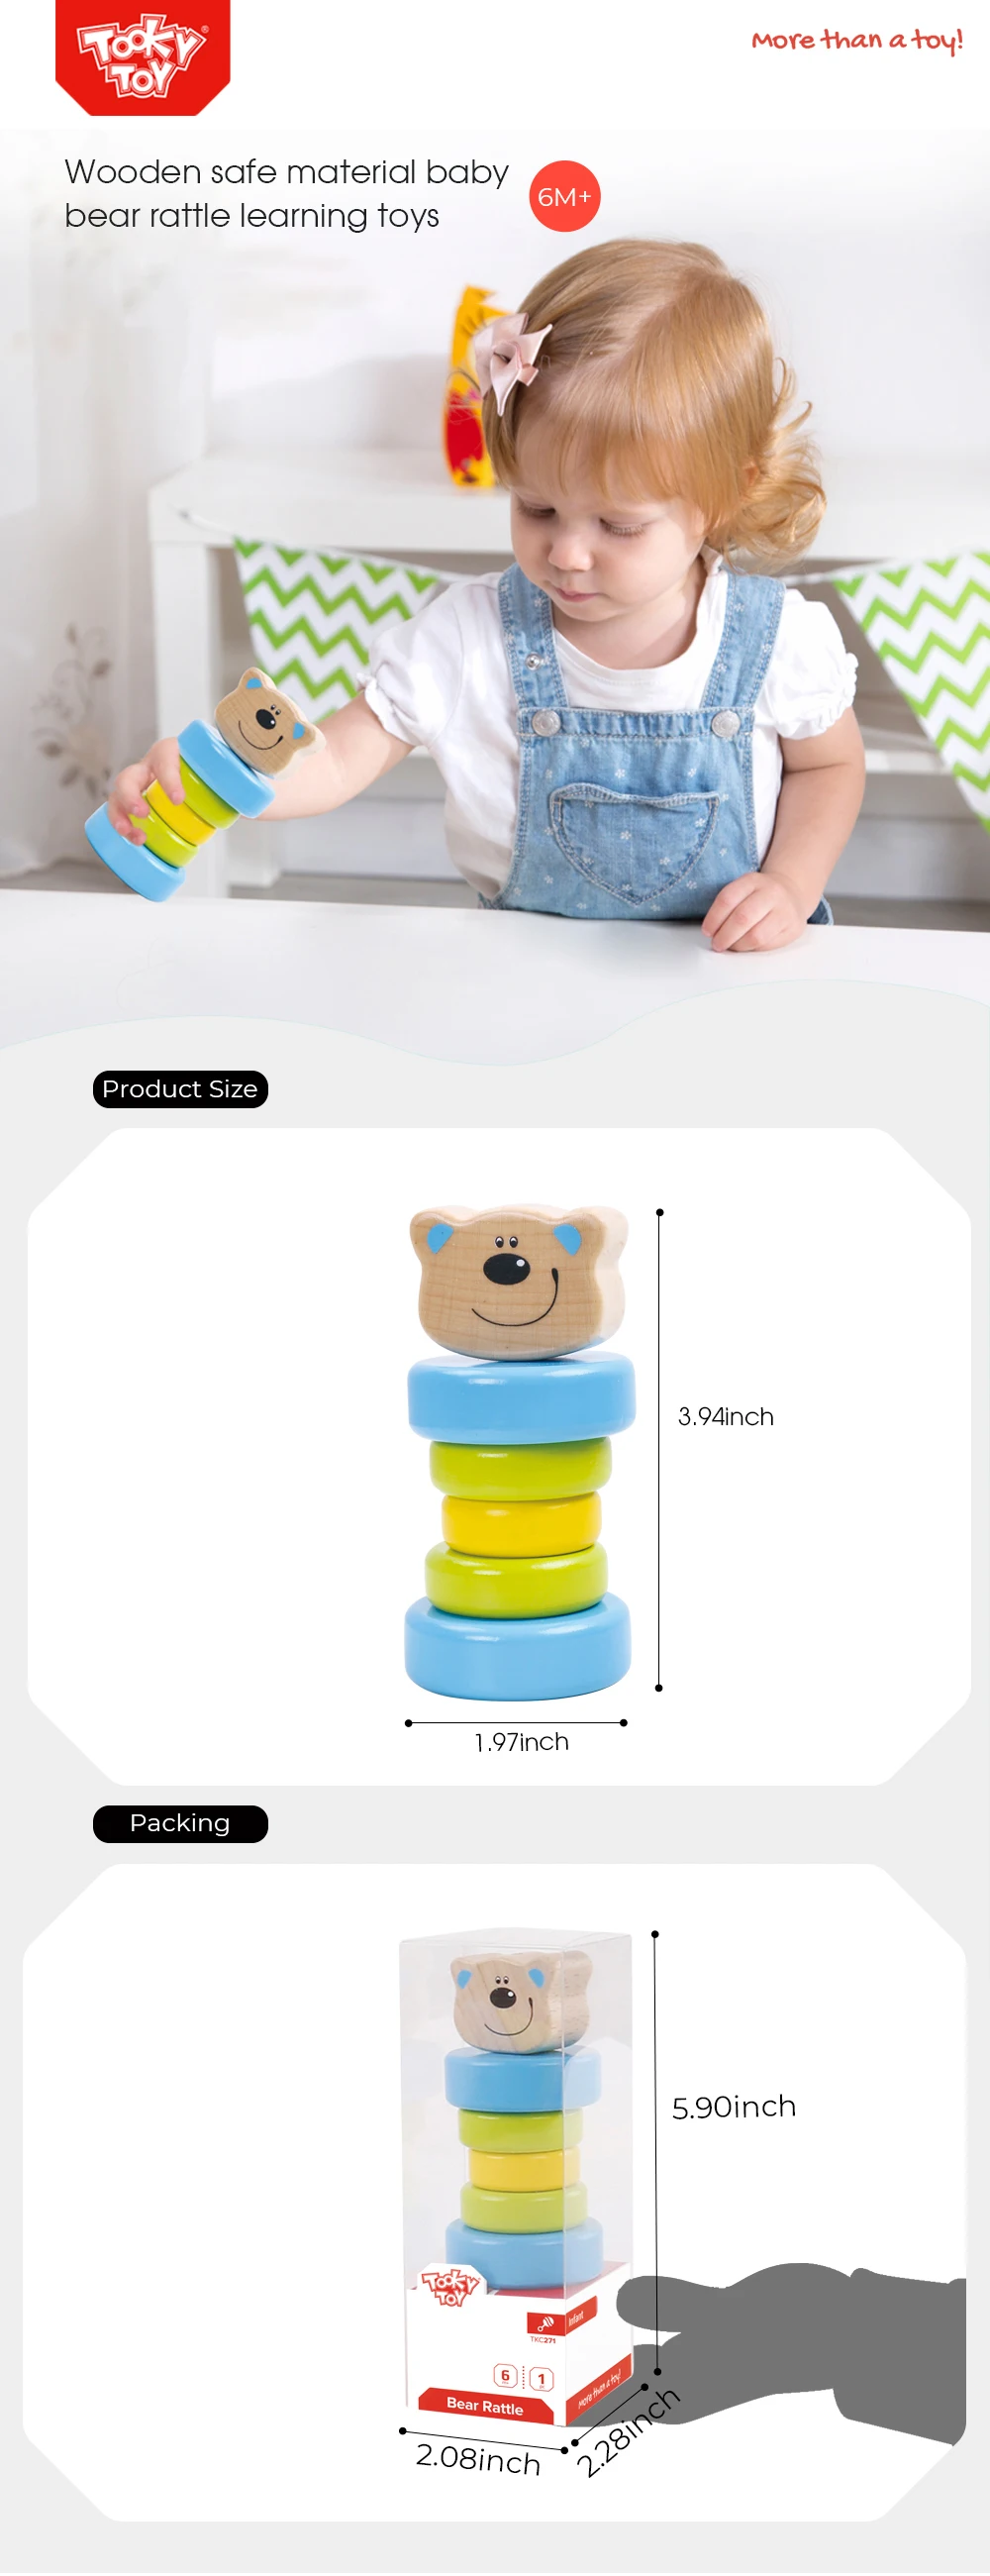 Wooden safe material baby bear rattle learning toys